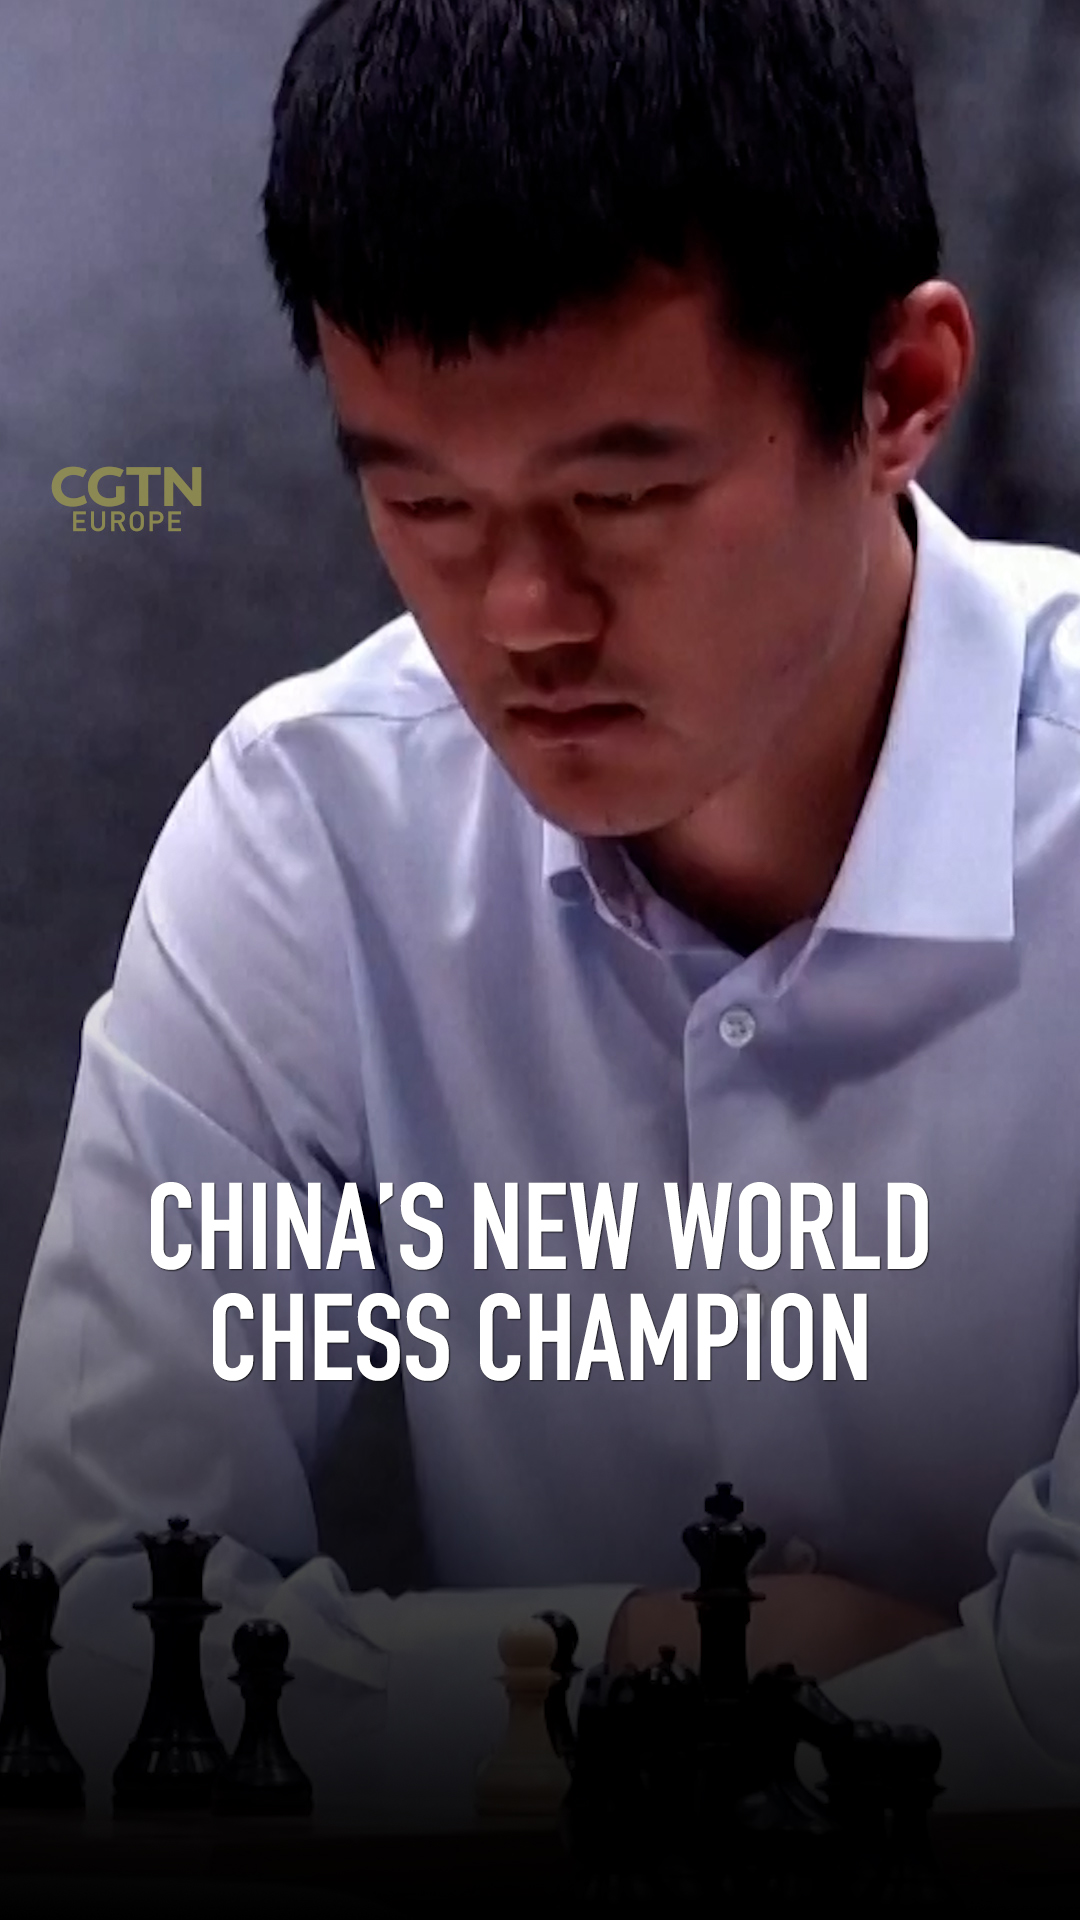 Do You Know The World Chess Champions?